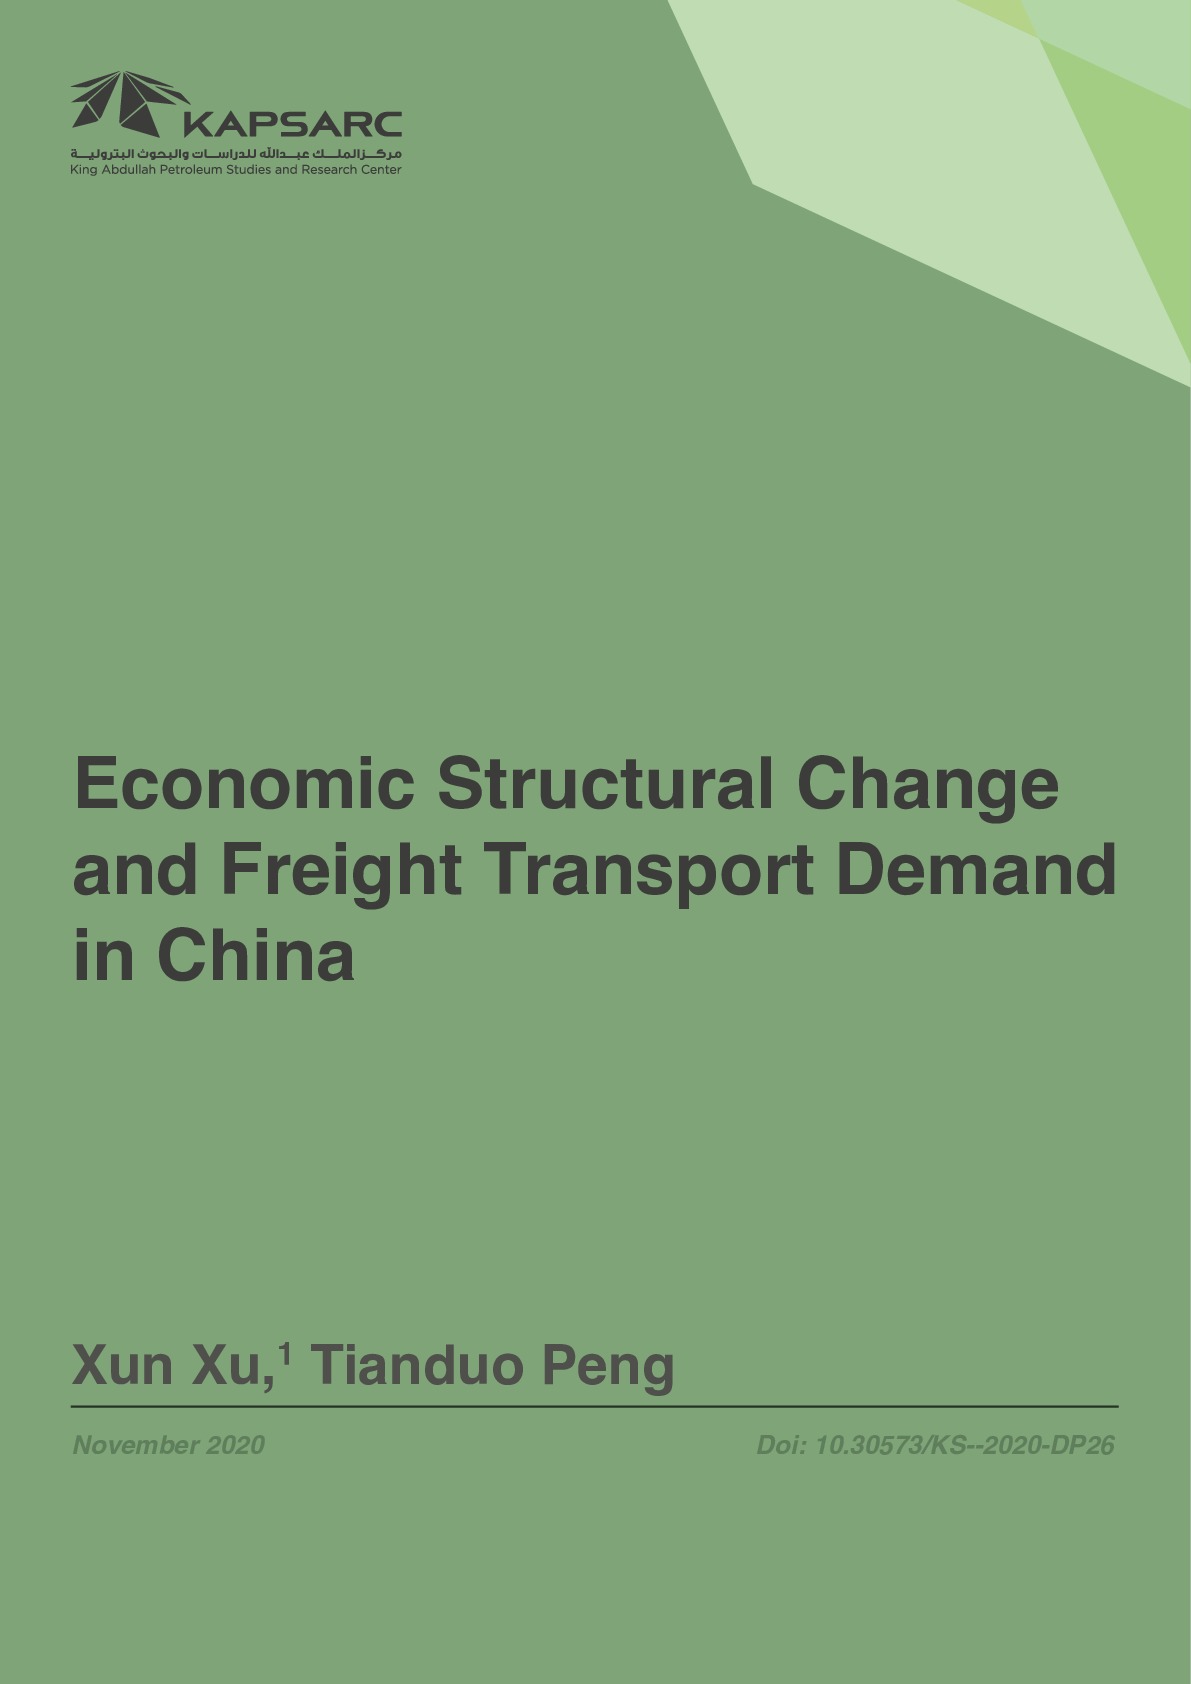 Economic Structural Change and Freight Transport Demand in China